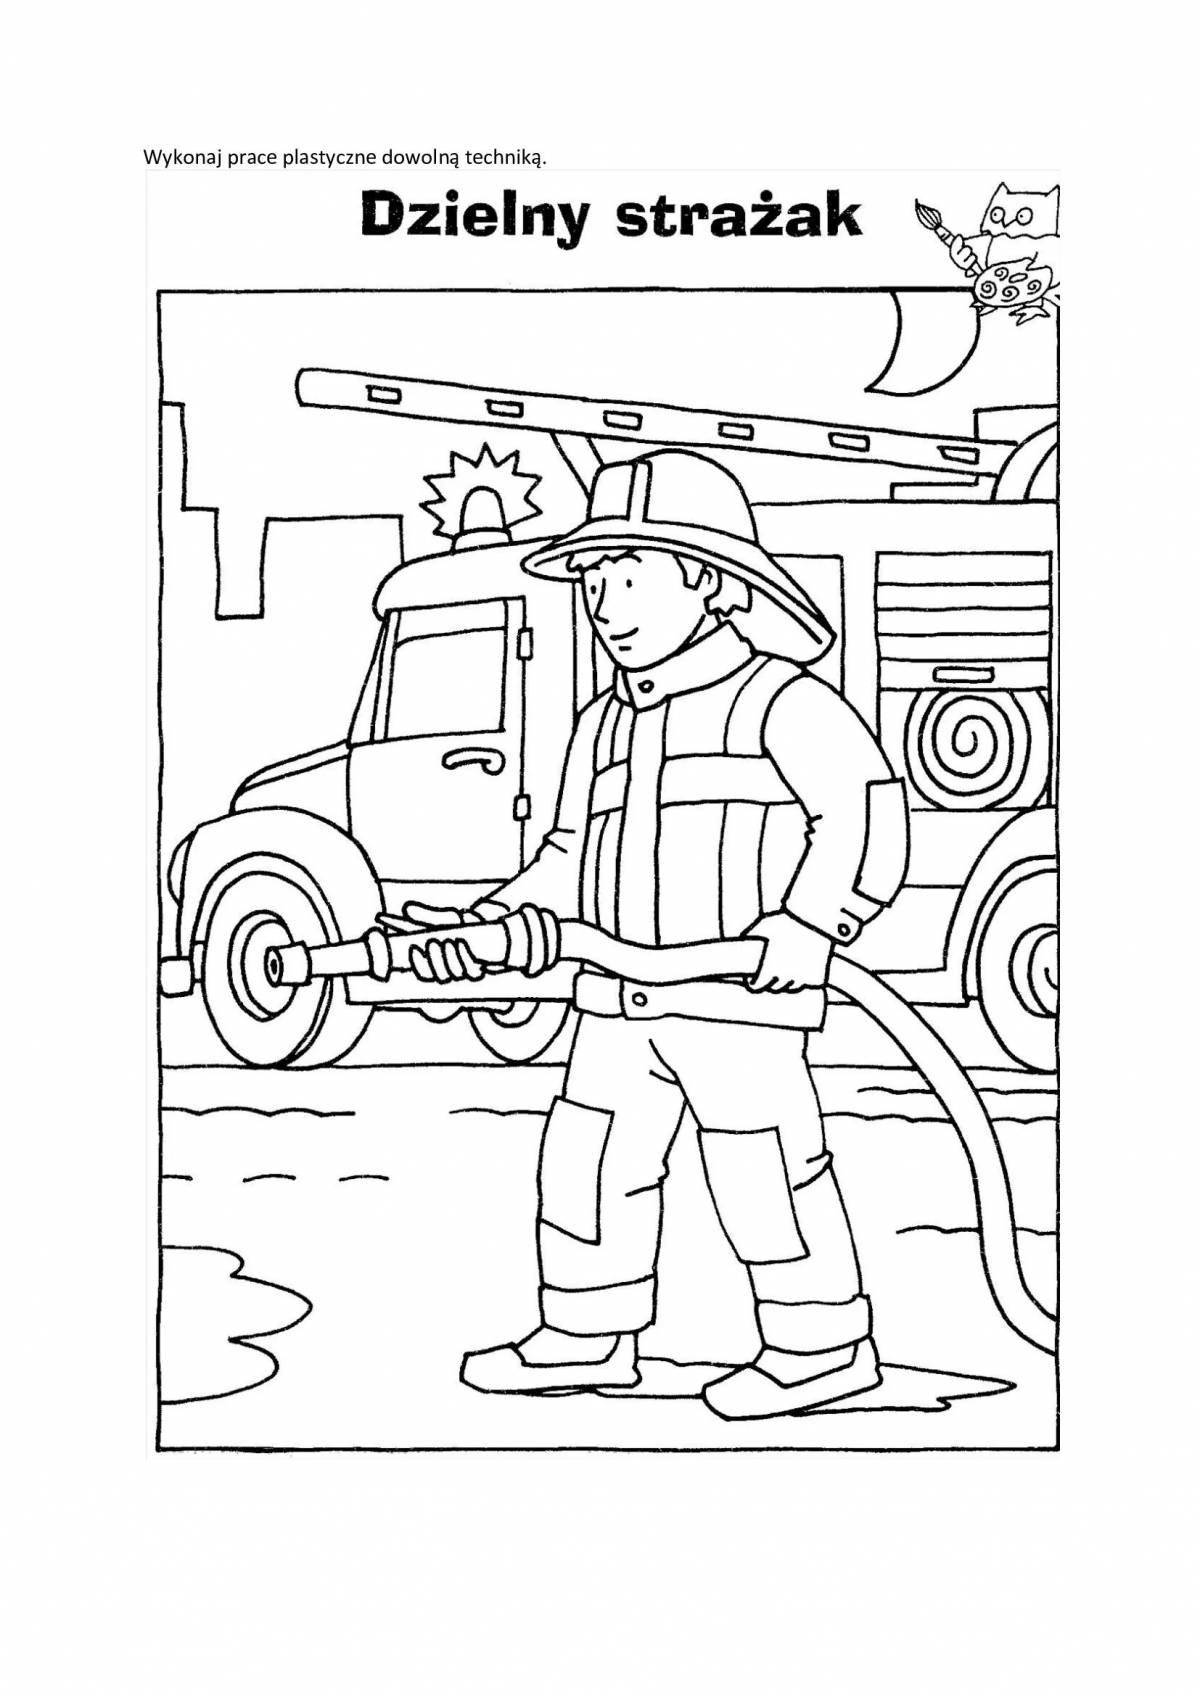 Attractive firefighter profession coloring page